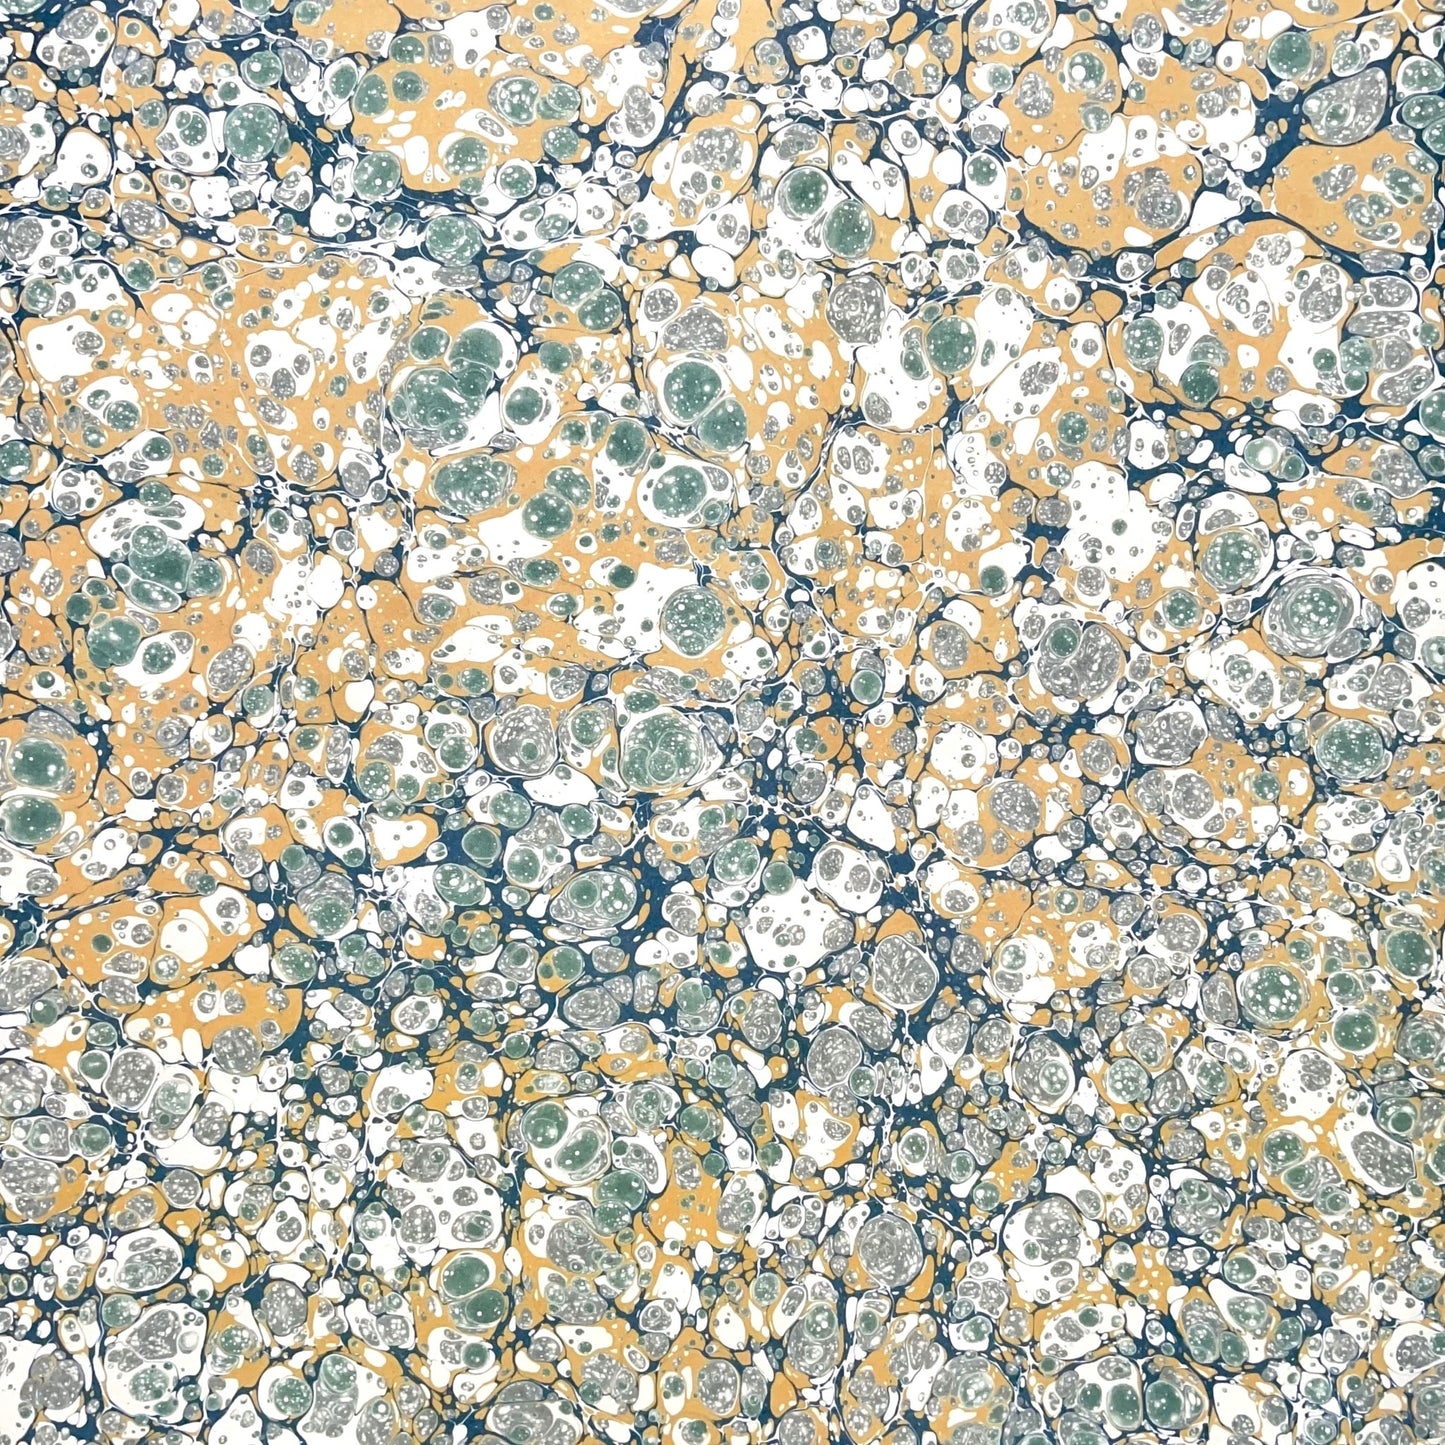 Printed marbled wrapping paper by Jemma Lewis Marbling. Marbled paper in soft greens, teal and yellow